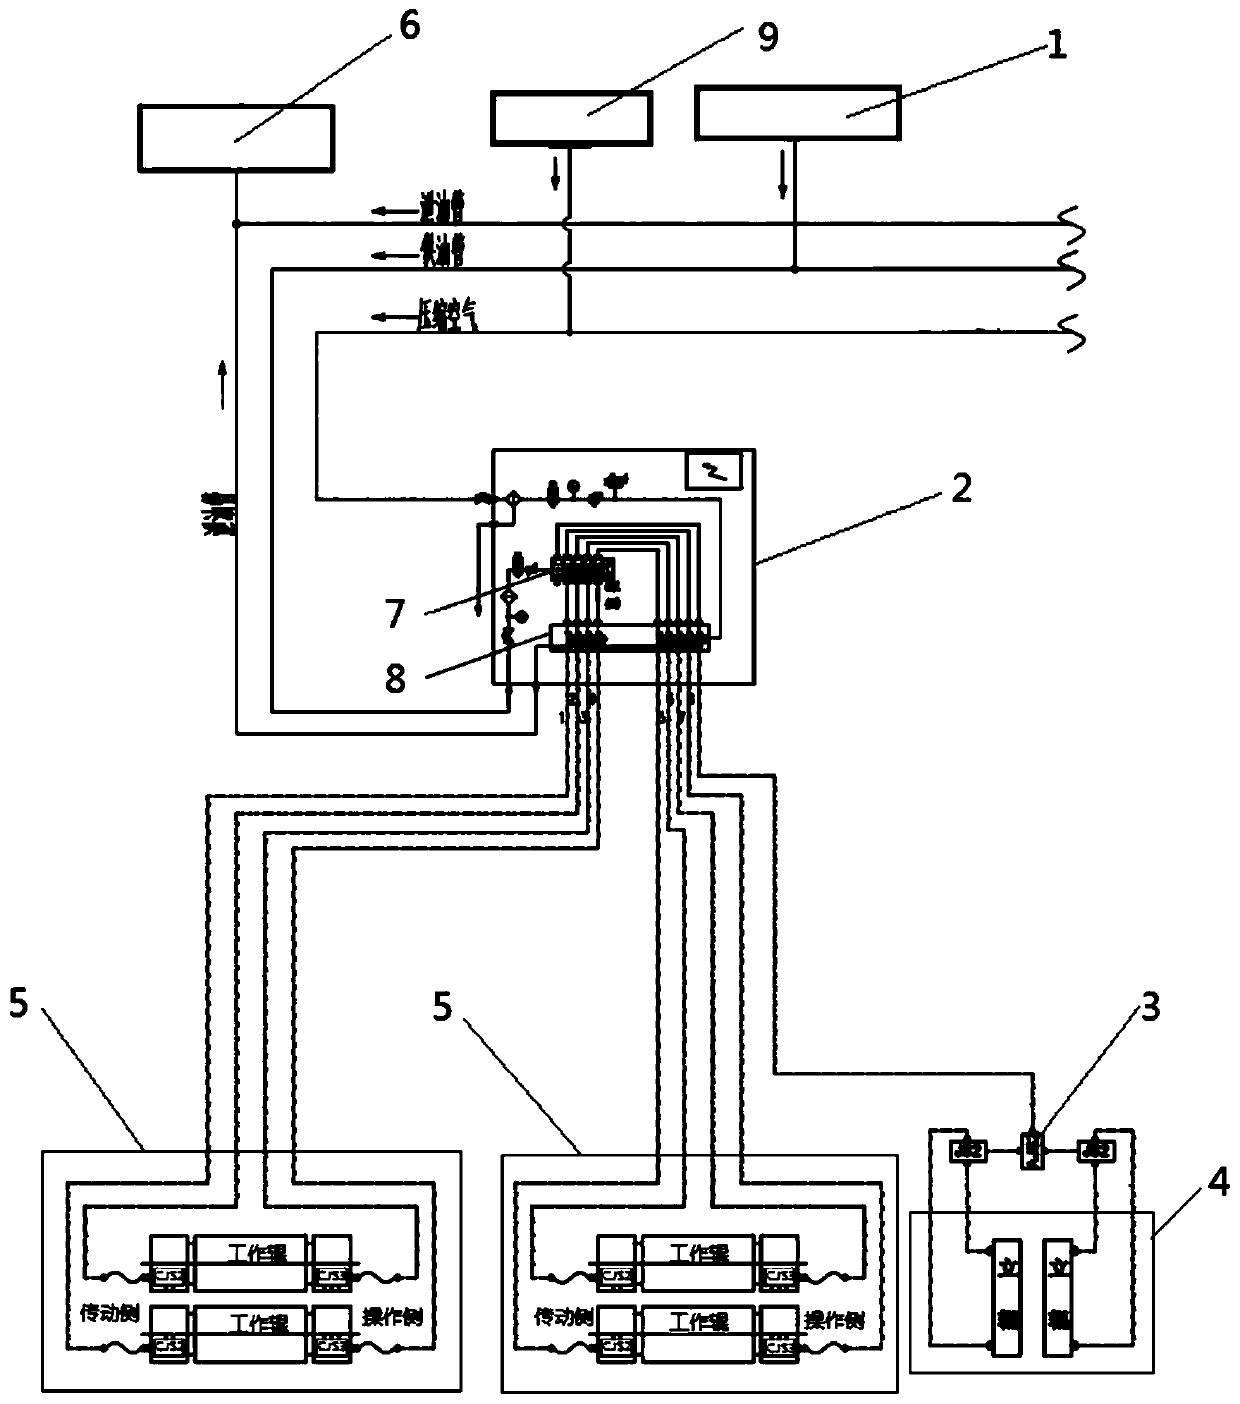 Oil-air lubrication system of rolling mills